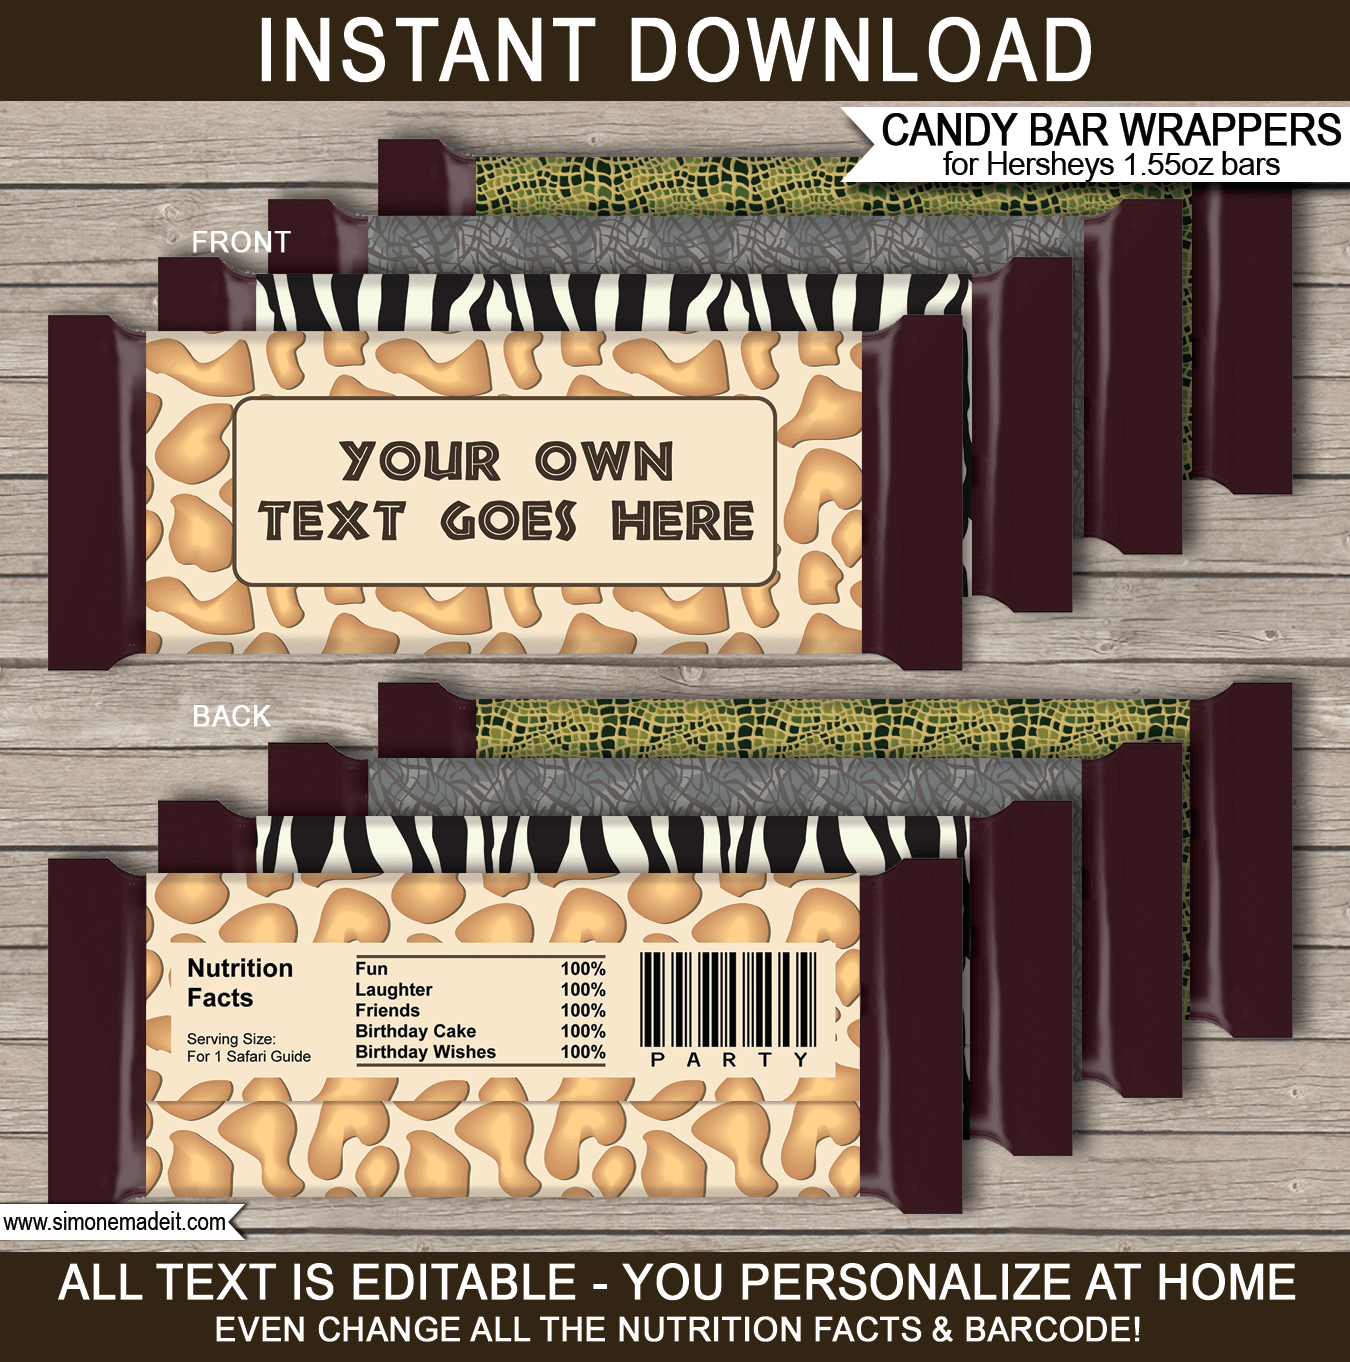 Jungle, Zoo or Animal Safari Hershey Candy Bar Wrappers | Birthday Party Favors | Personalized Candy Bars | Editable Template | INSTANT DOWNLOAD $3.00 via simonemadeit.com